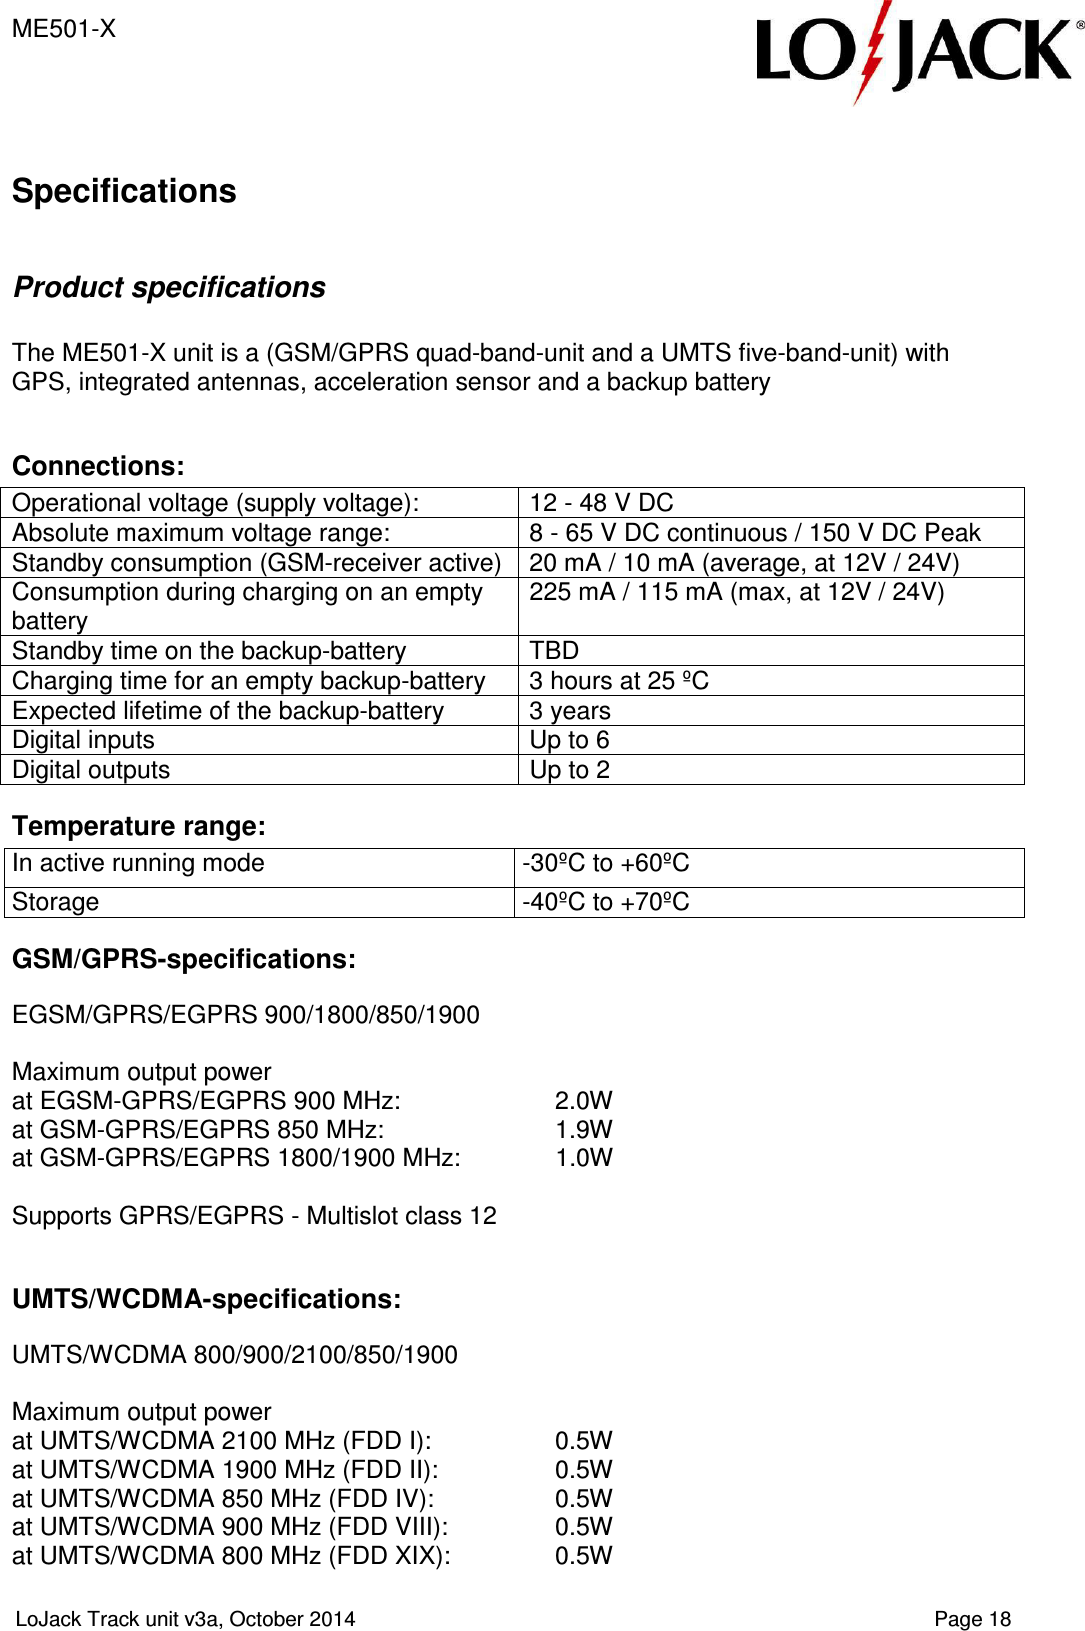 ME501-X  LoJack Track unit v3a, October 2014    Page 18  Specifications  Product specifications  The ME501-X unit is a (GSM/GPRS quad-band-unit and a UMTS five-band-unit) with GPS, integrated antennas, acceleration sensor and a backup battery  Connections: Operational voltage (supply voltage):  12 - 48 V DC Absolute maximum voltage range:  8 - 65 V DC continuous / 150 V DC Peak Standby consumption (GSM-receiver active)  20 mA / 10 mA (average, at 12V / 24V) Consumption during charging on an empty battery 225 mA / 115 mA (max, at 12V / 24V) Standby time on the backup-battery  TBD Charging time for an empty backup-battery  3 hours at 25 ºC Expected lifetime of the backup-battery  3 years Digital inputs  Up to 6 Digital outputs  Up to 2 Temperature range: In active running mode  -30ºC to +60ºC Storage  -40ºC to +70ºC GSM/GPRS-specifications:  EGSM/GPRS/EGPRS 900/1800/850/1900  Maximum output power  at EGSM-GPRS/EGPRS 900 MHz:    2.0W  at GSM-GPRS/EGPRS 850 MHz:    1.9W  at GSM-GPRS/EGPRS 1800/1900 MHz:   1.0W   Supports GPRS/EGPRS - Multislot class 12  UMTS/WCDMA-specifications:  UMTS/WCDMA 800/900/2100/850/1900  Maximum output power  at UMTS/WCDMA 2100 MHz (FDD I):   0.5W  at UMTS/WCDMA 1900 MHz (FDD II):  0.5W  at UMTS/WCDMA 850 MHz (FDD IV):  0.5W  at UMTS/WCDMA 900 MHz (FDD VIII):  0.5W  at UMTS/WCDMA 800 MHz (FDD XIX):  0.5W 